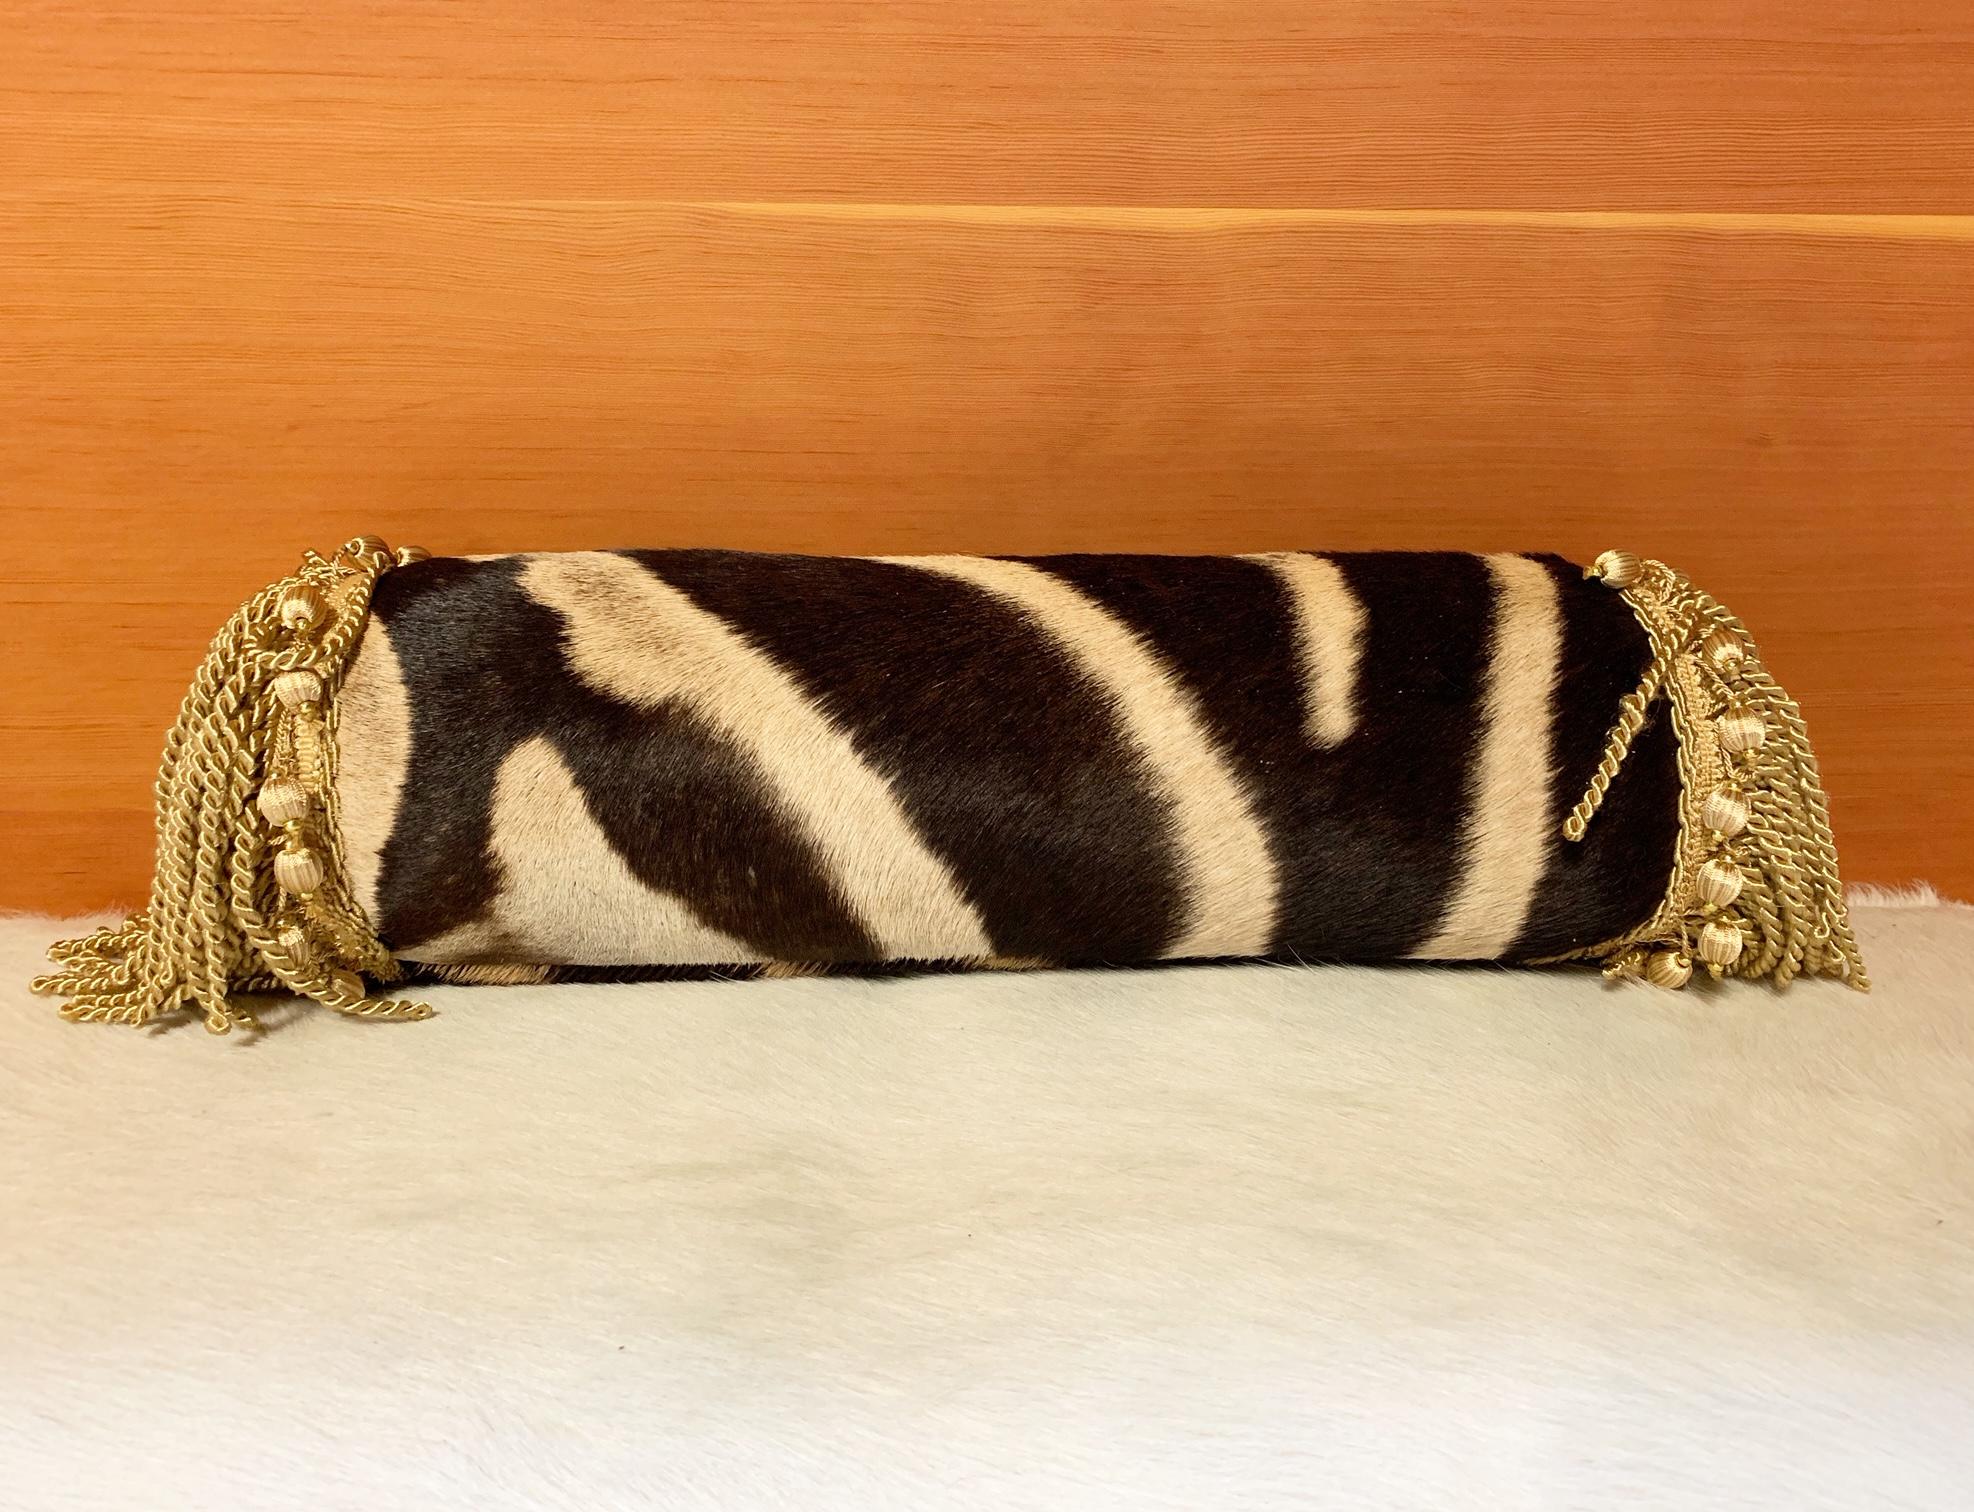 American One of a Kind Zebra Pillow